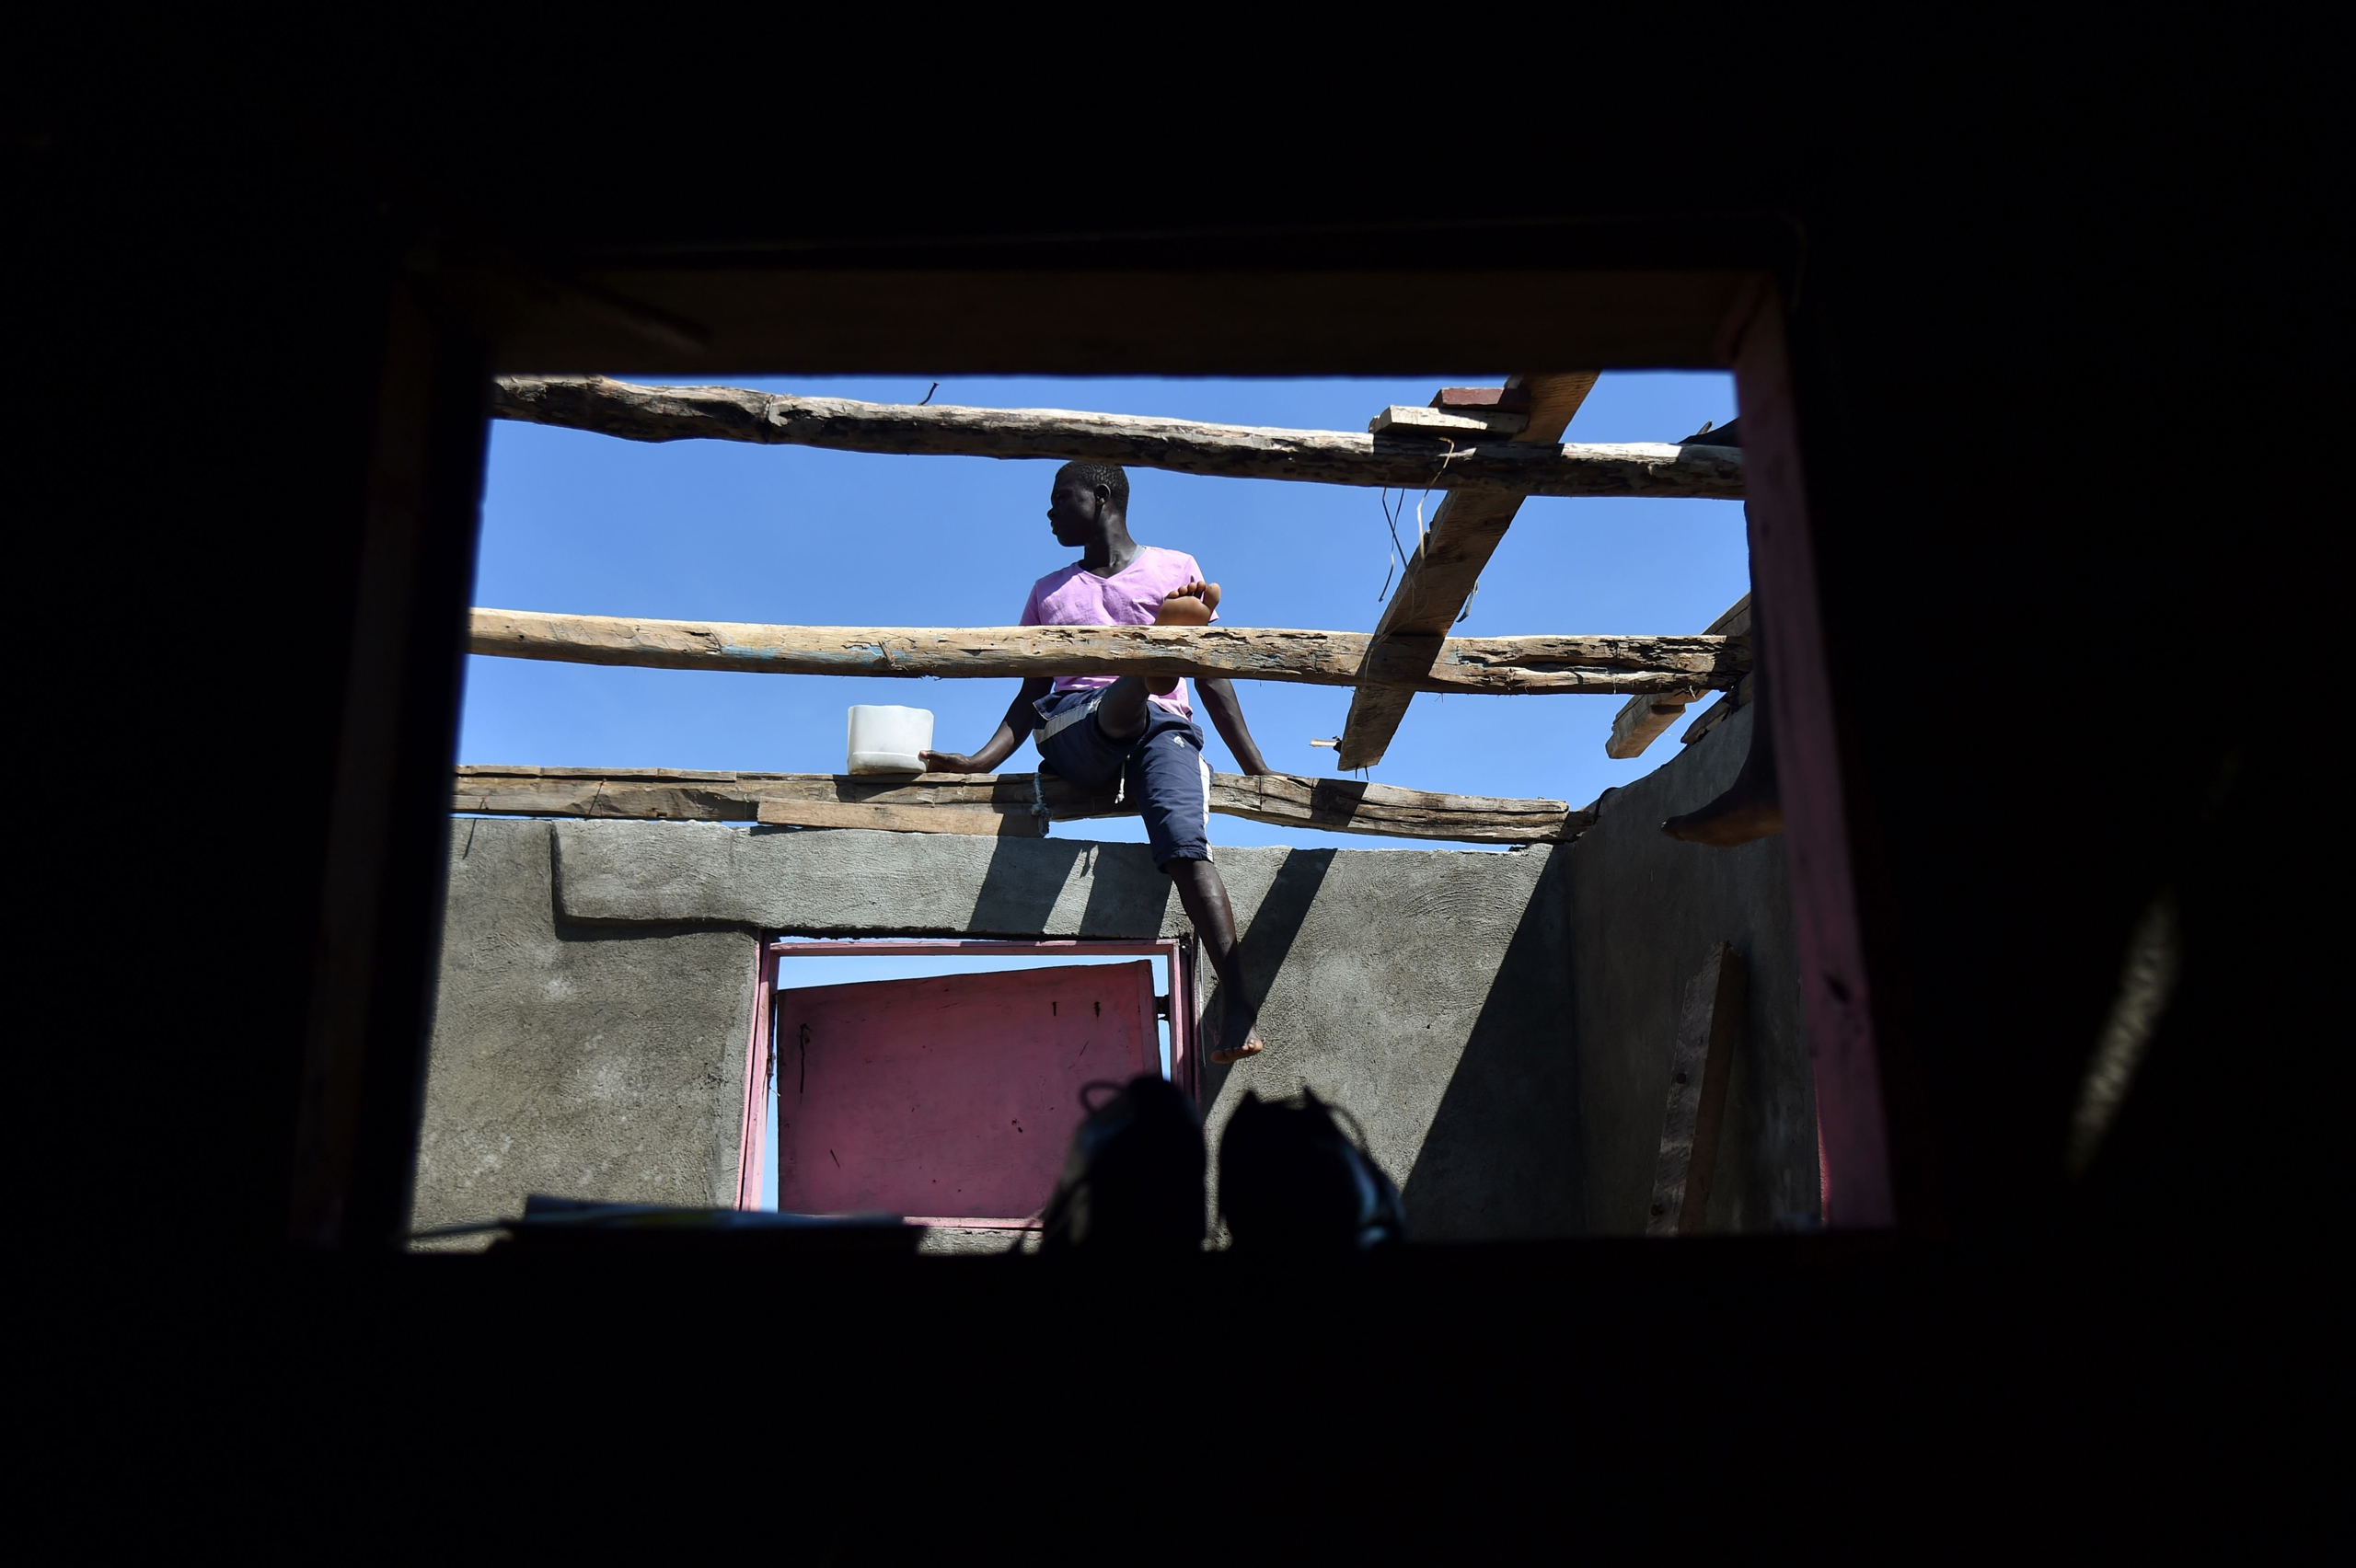 Members of a family repair their home damaged by Hurricane Matthew in Gomier, Haiti, on Oct. 8, 2016.